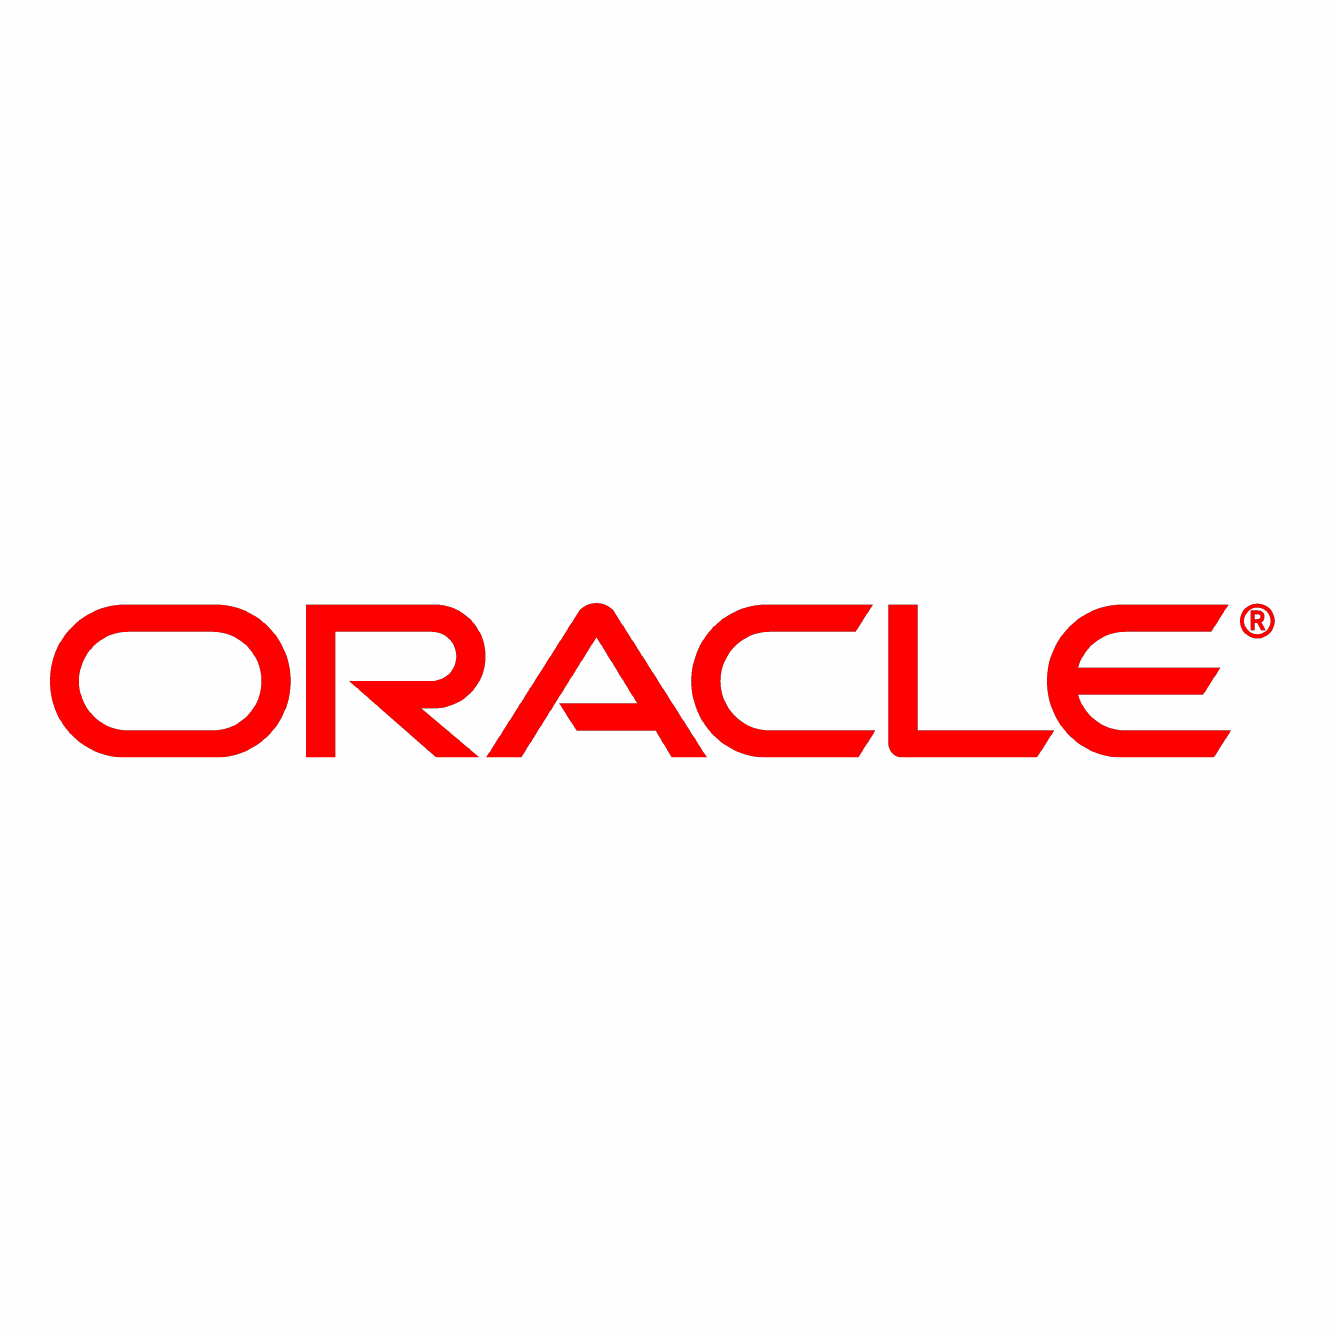 http://securetech.ae/wp-content/uploads/2019/02/19.ORACLE.png